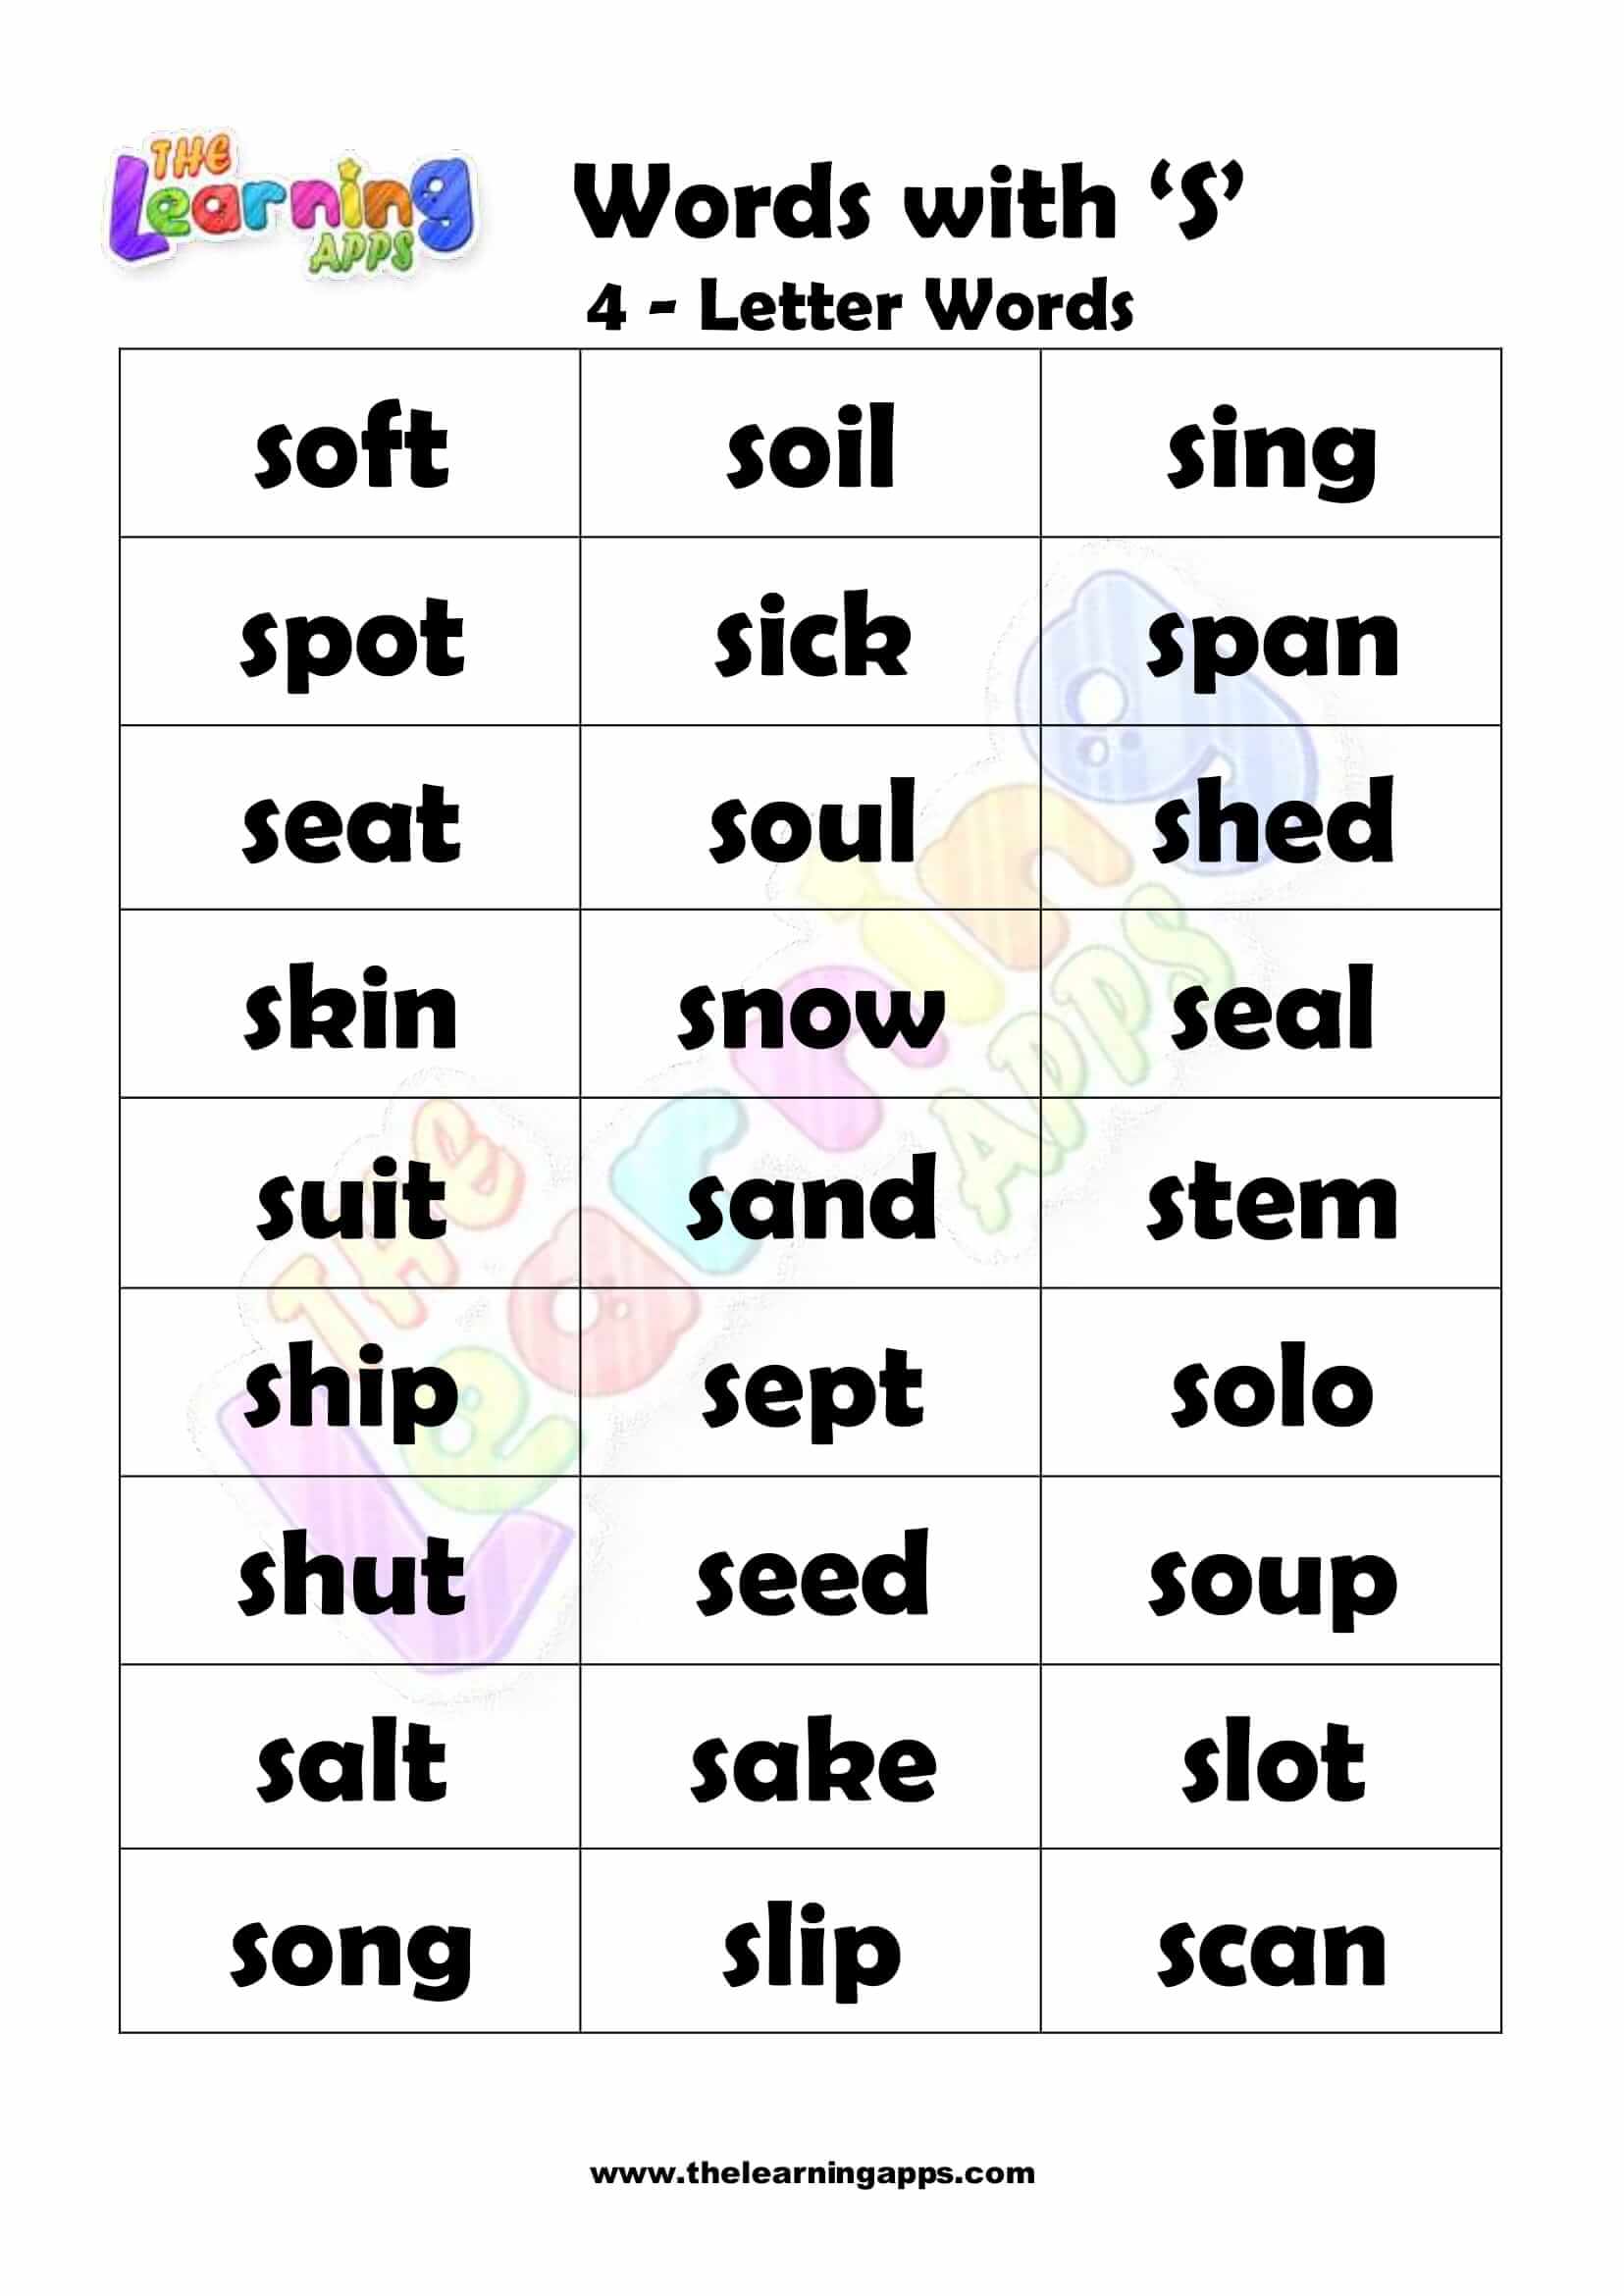 4 LETTER WORD STARTING WITH S-2